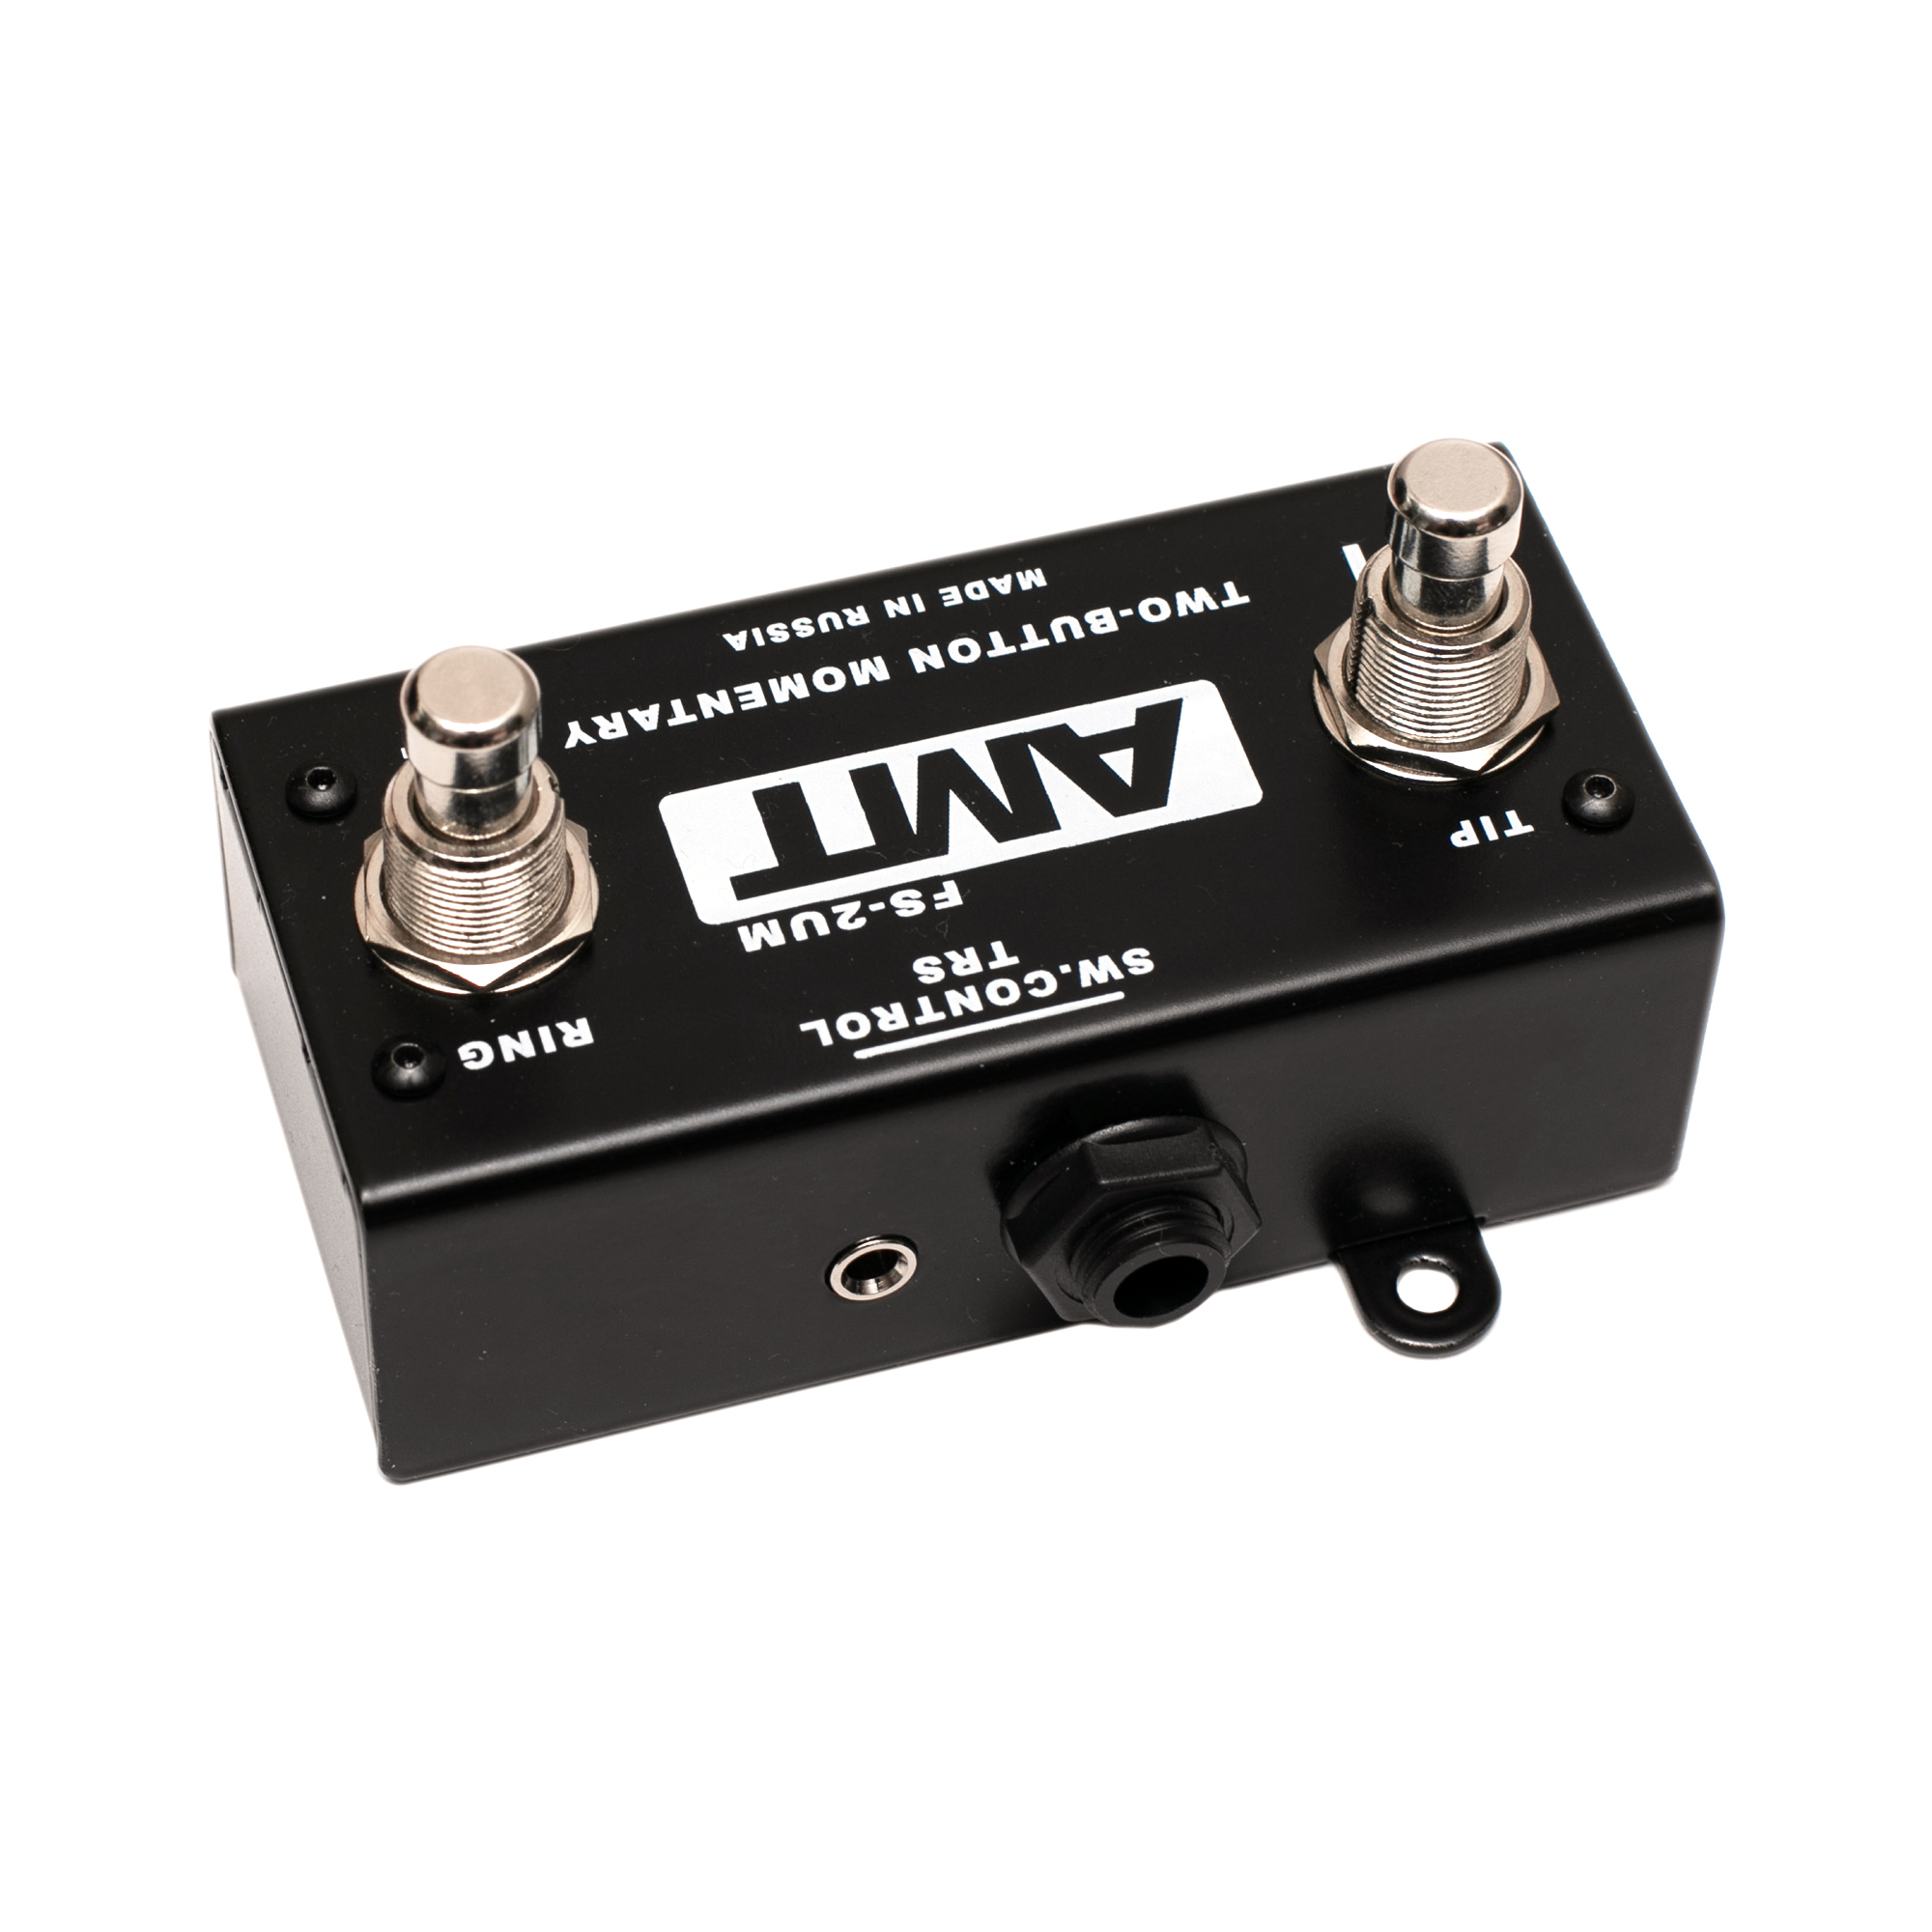 AMT FS-2UM - silent mini footswitch with momentary (unlatched) buttons